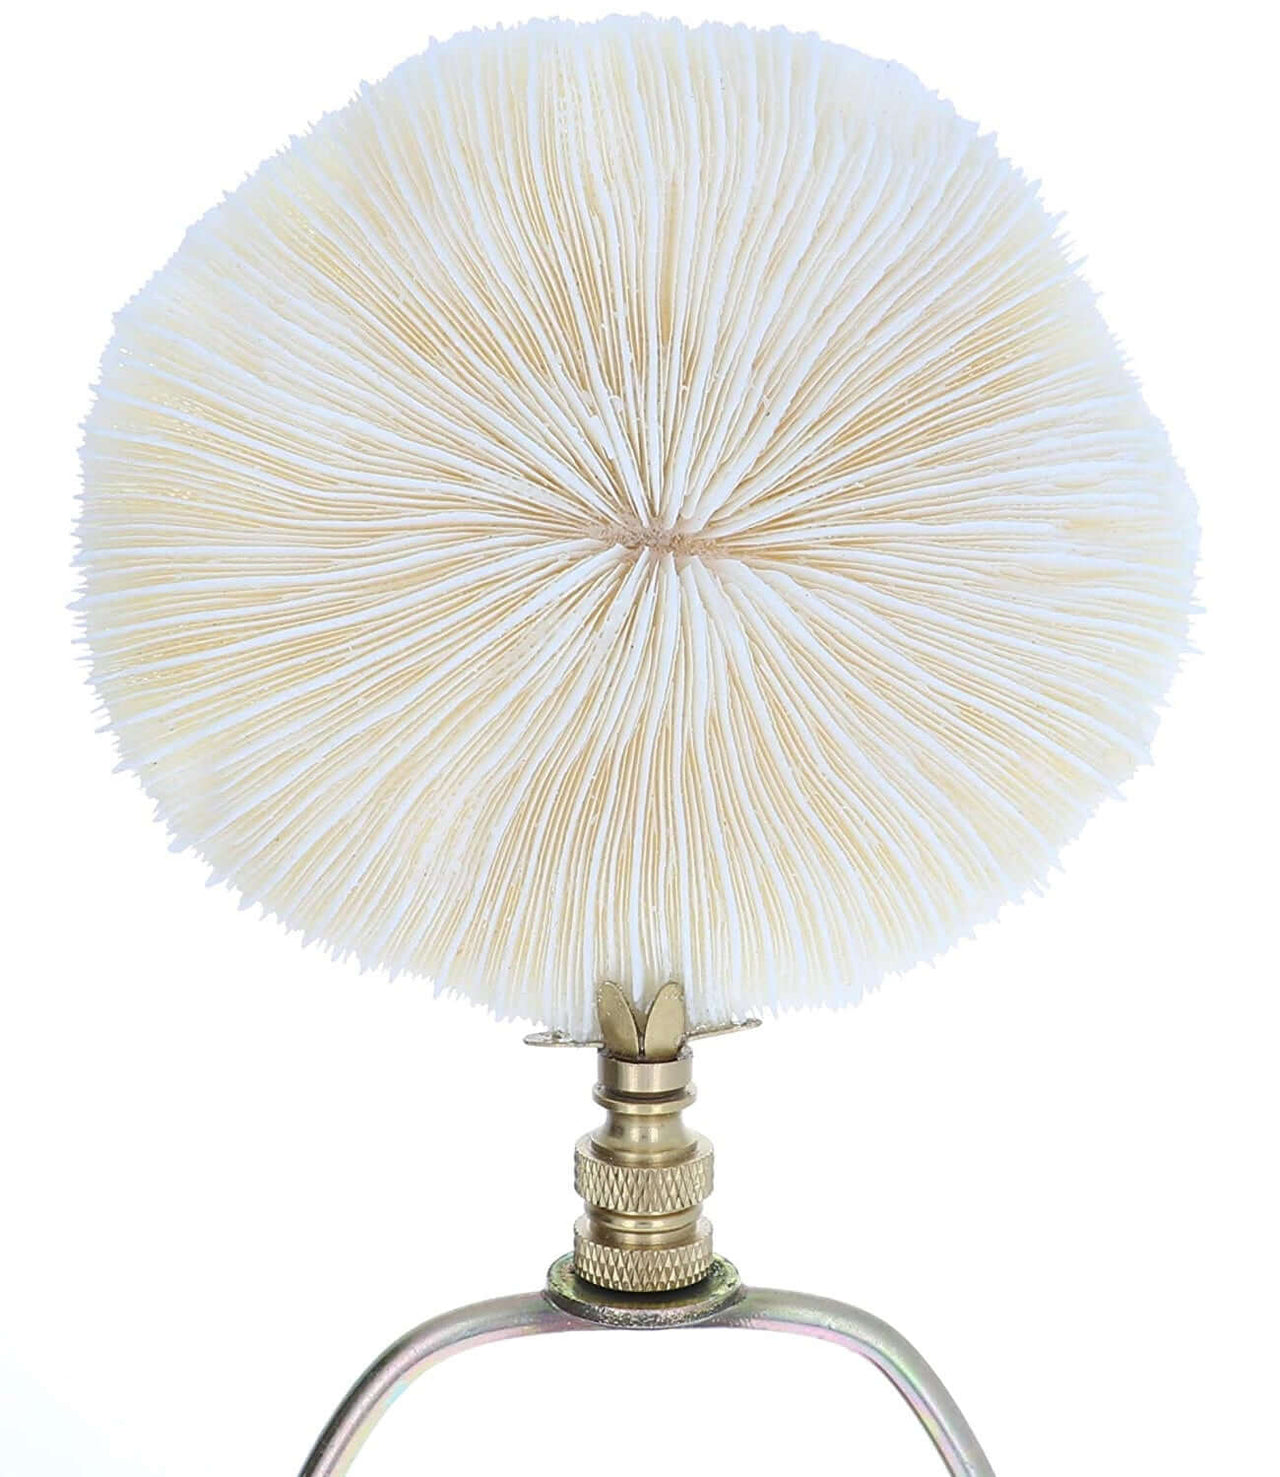 Art Finial - Mushroom Coral Shell with Brass Base, Set of 2, Mini Works of Art, Update Your Lamps!